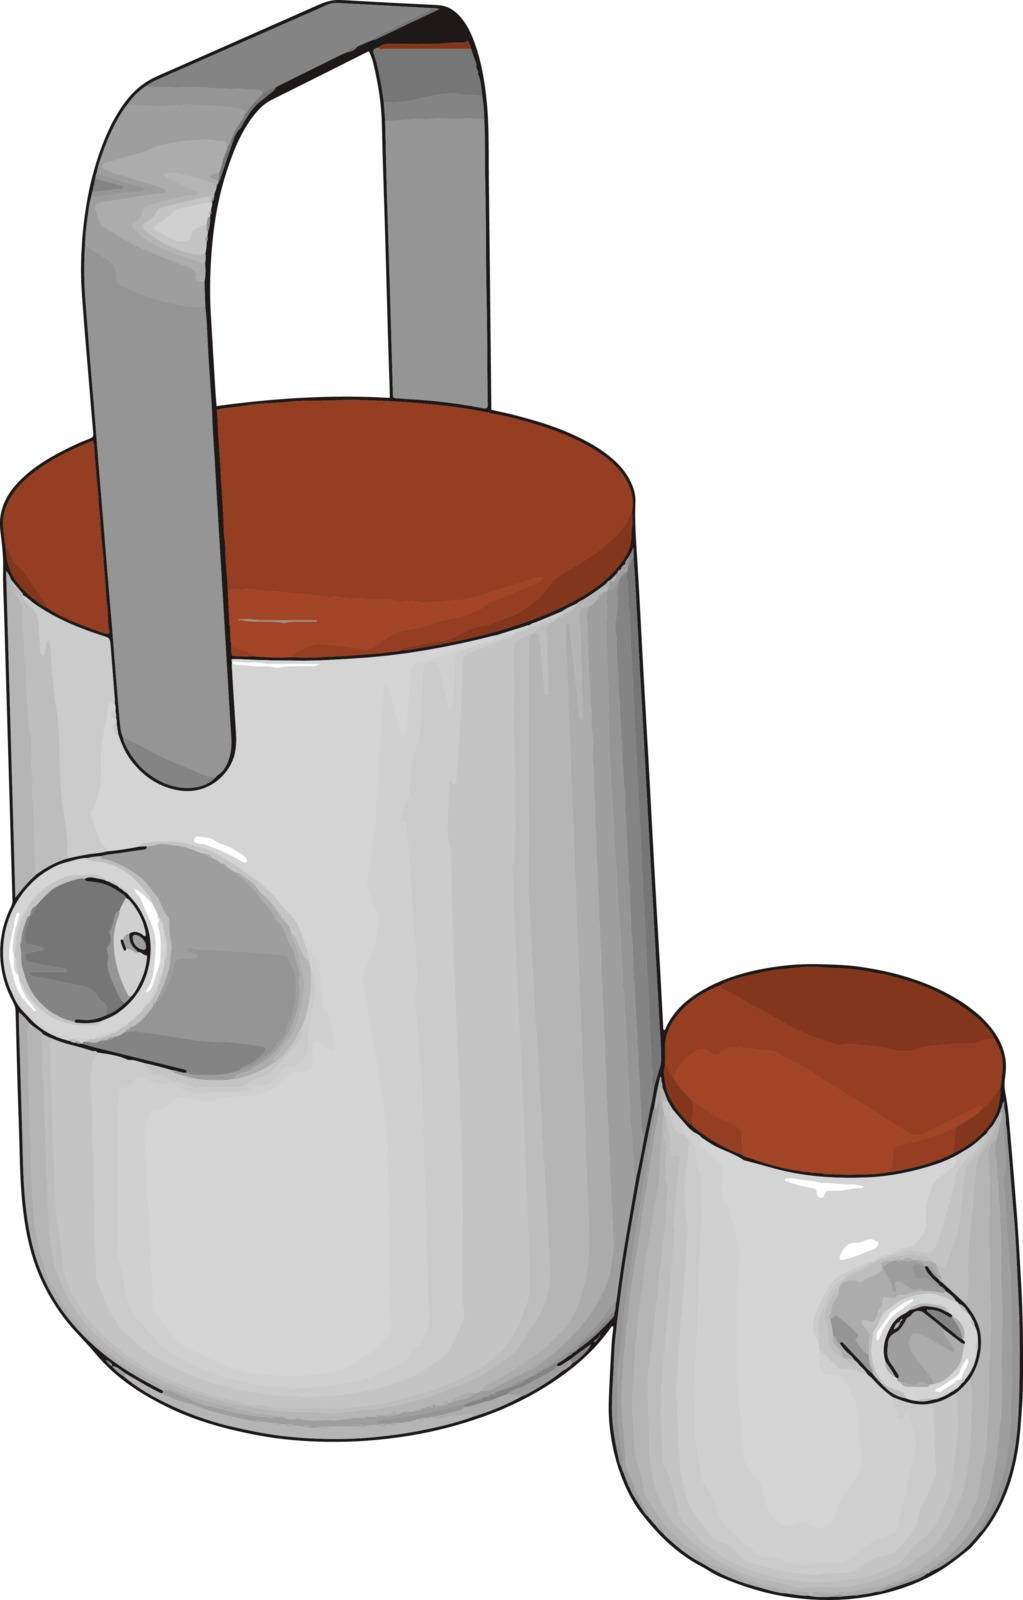 Thermo cups on table, illustration, vector on white background.